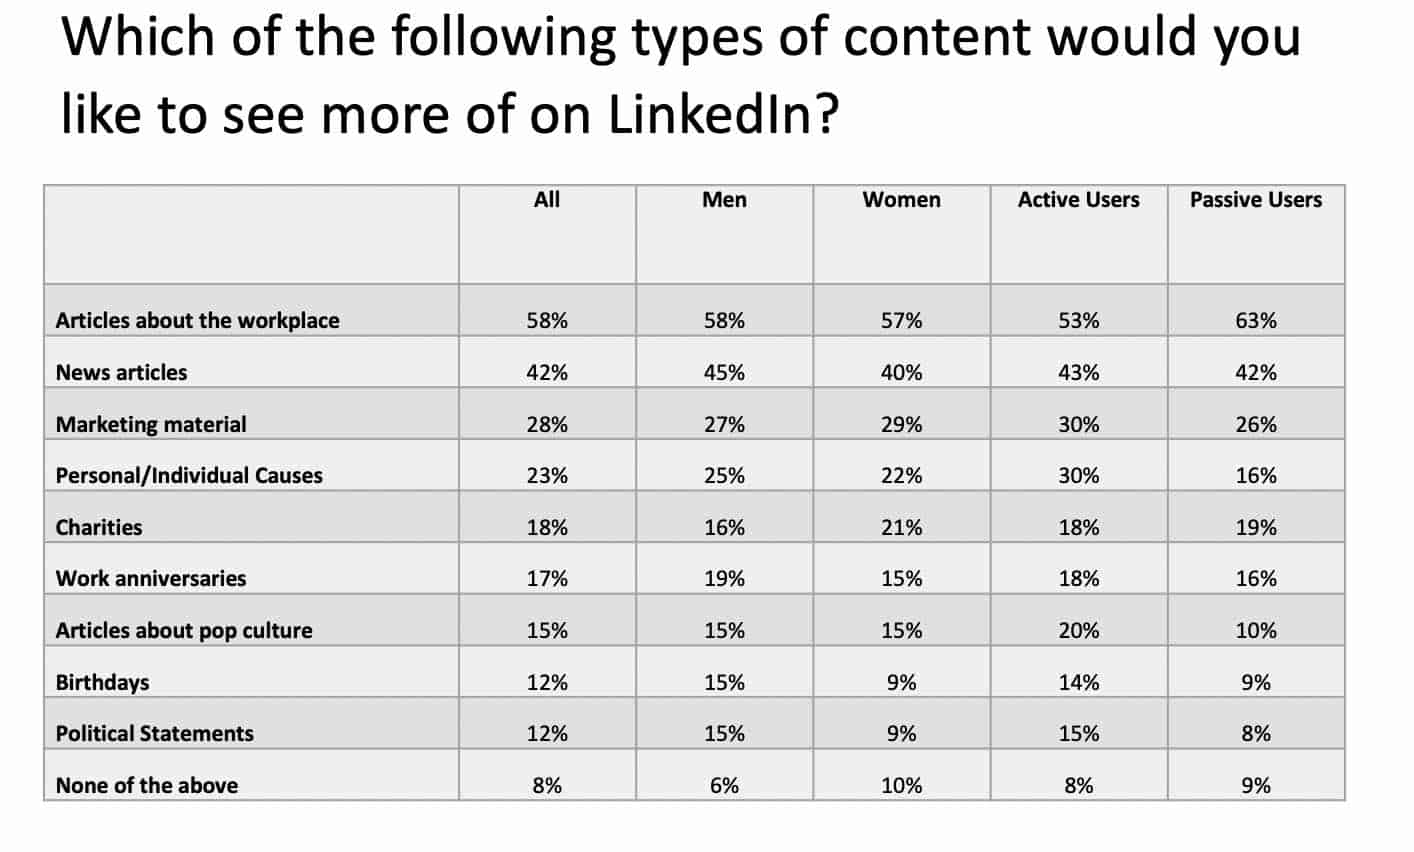 Linkedin Users Survey What would like to see more of